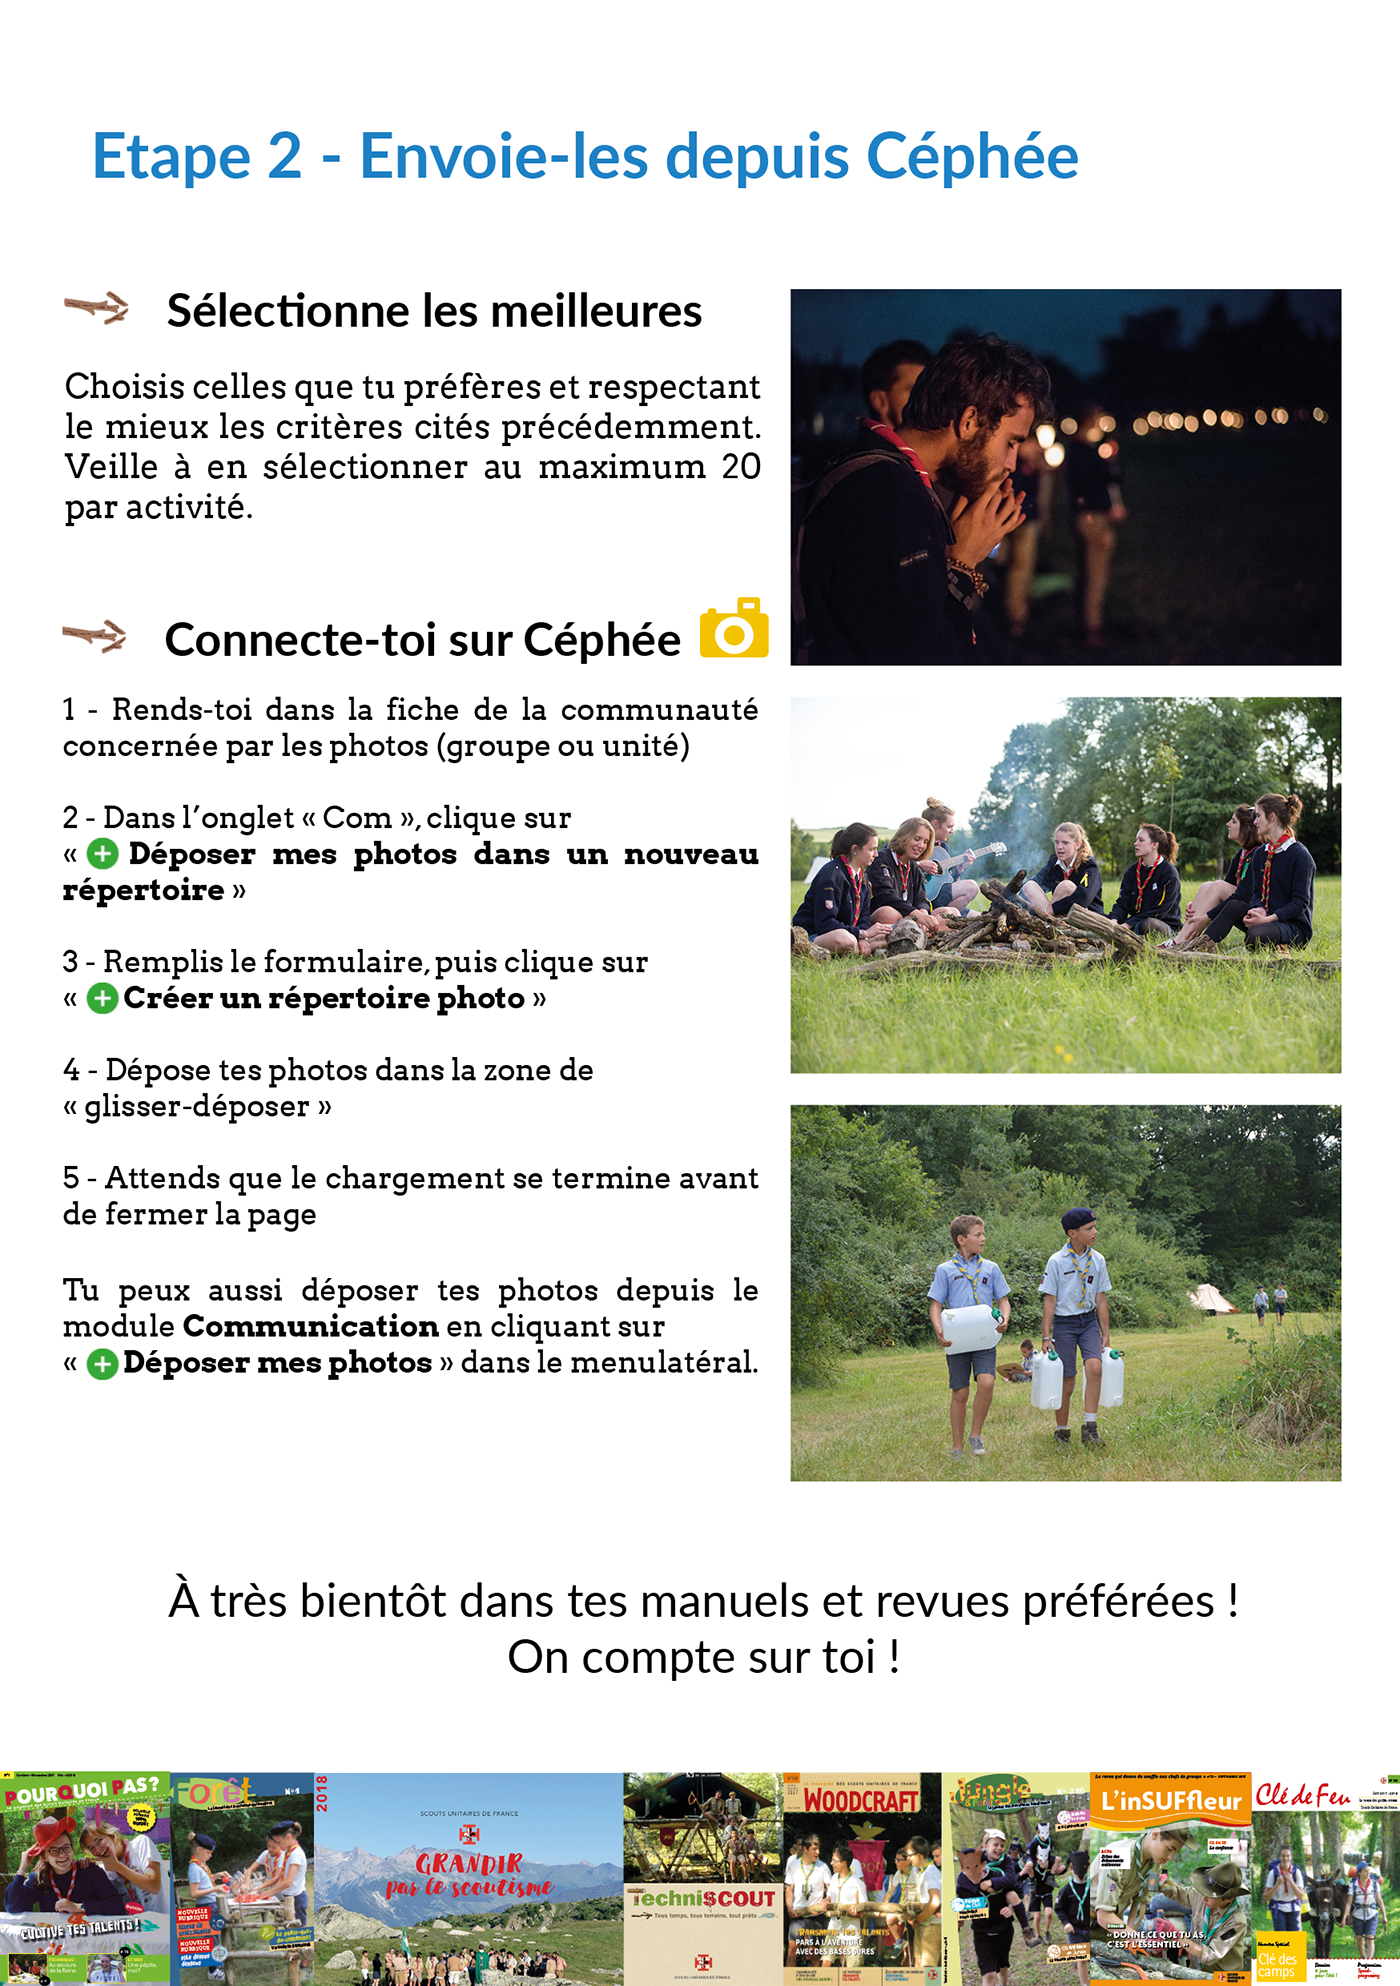 flyer scoutisme SUF photo astuces Guide